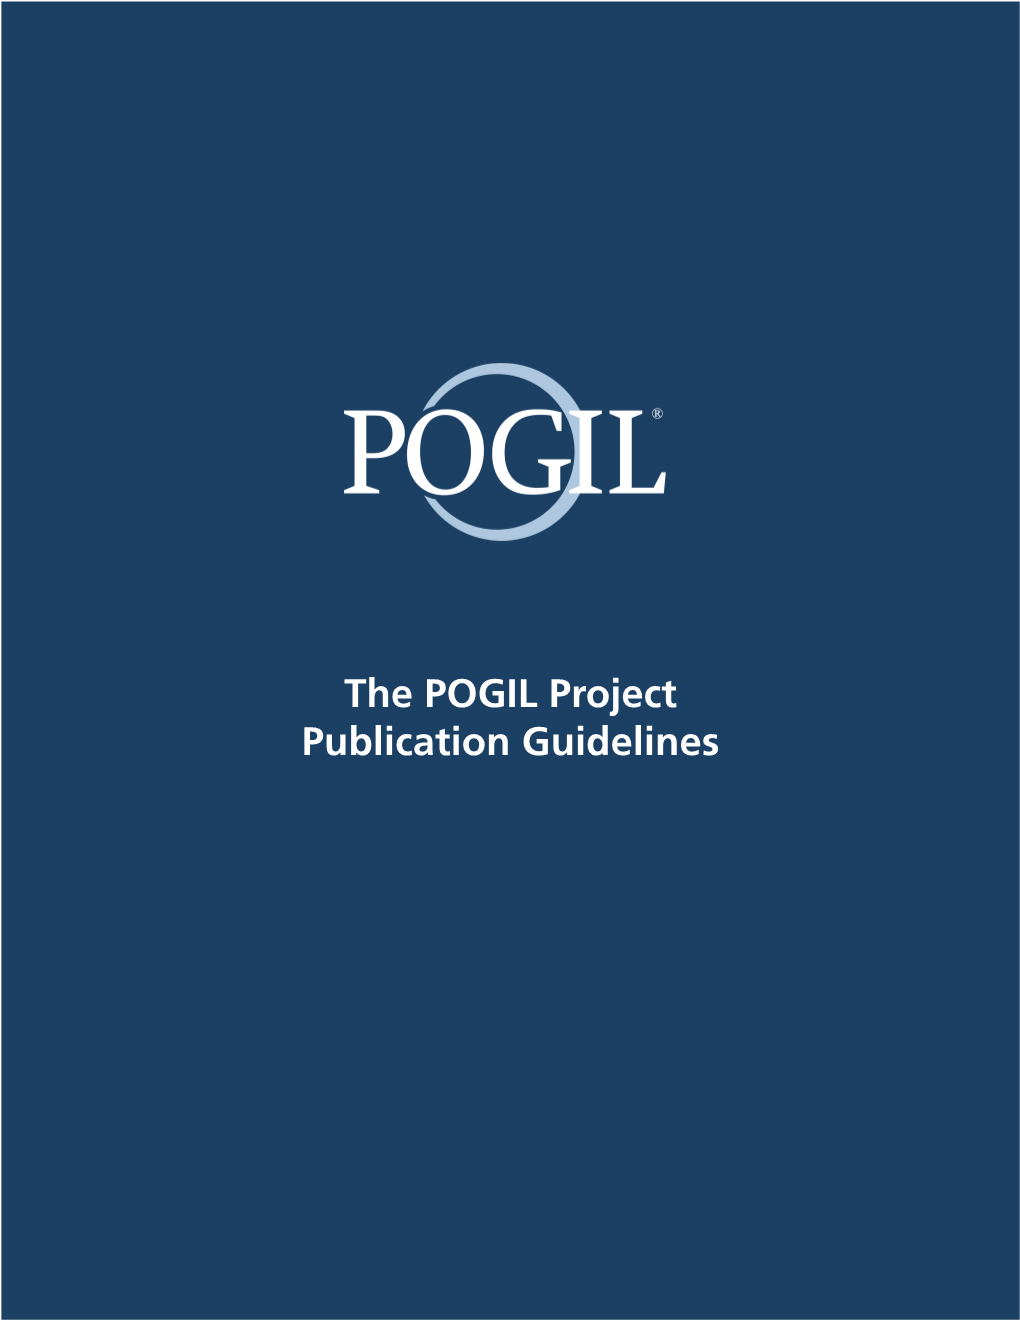 The POGIL Project Publication Guidelines